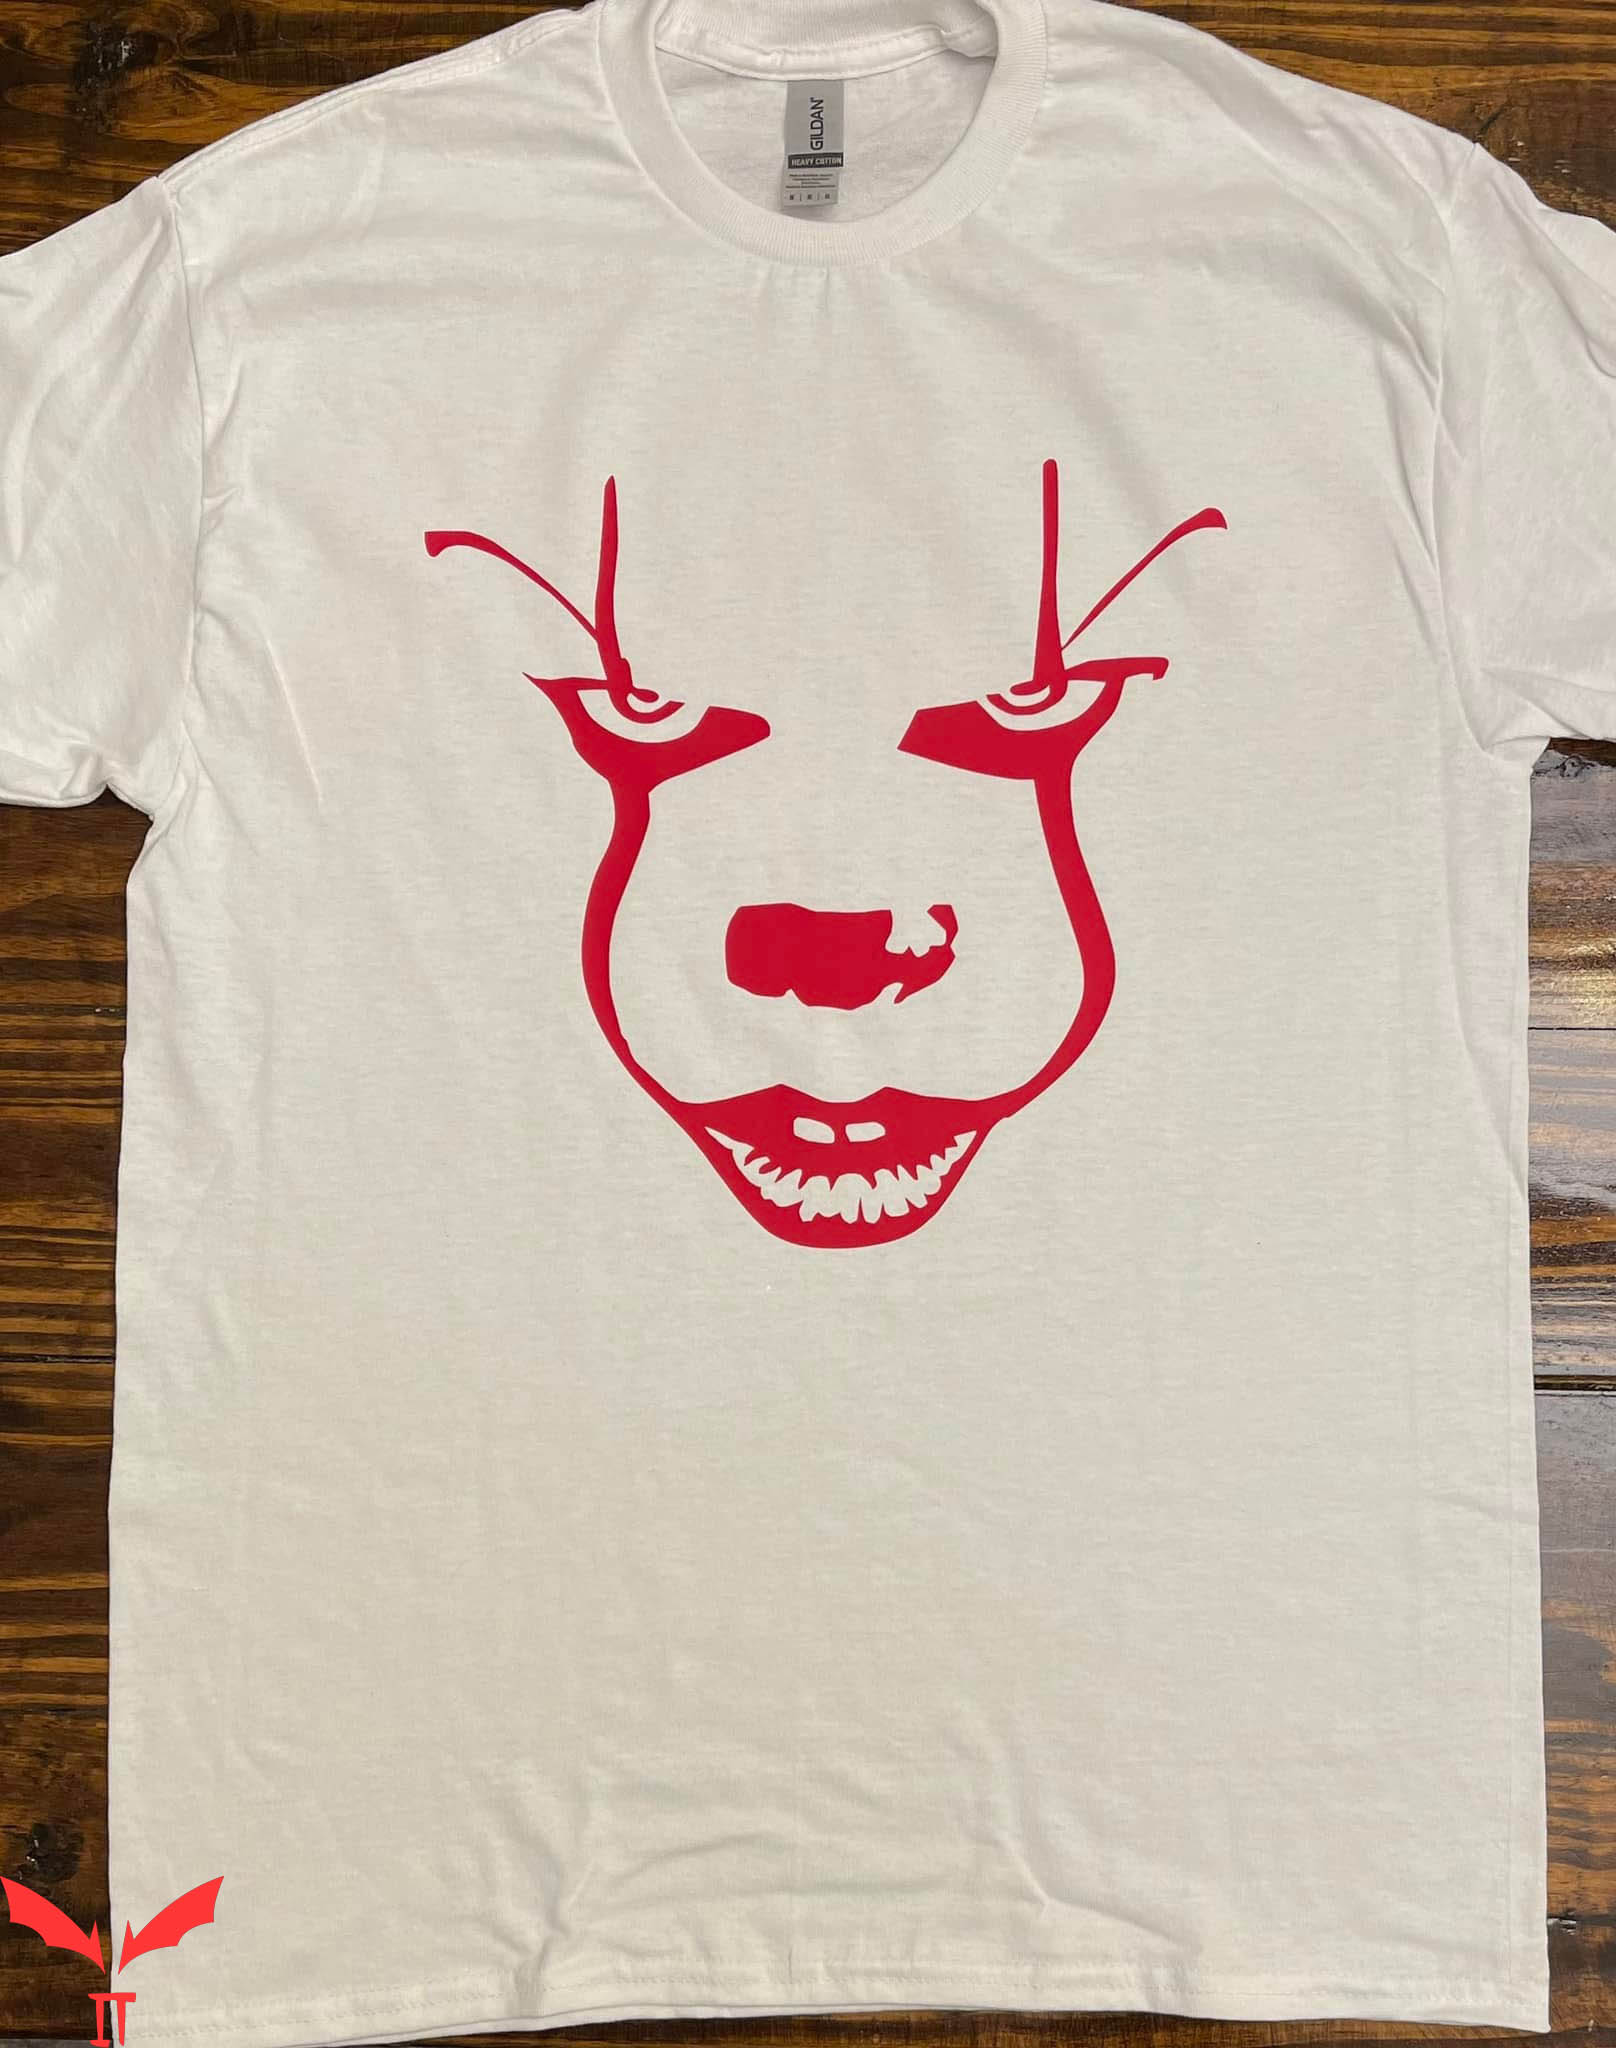 IT T-Shirt Horror Pennywise Smiling Face IT The Movie